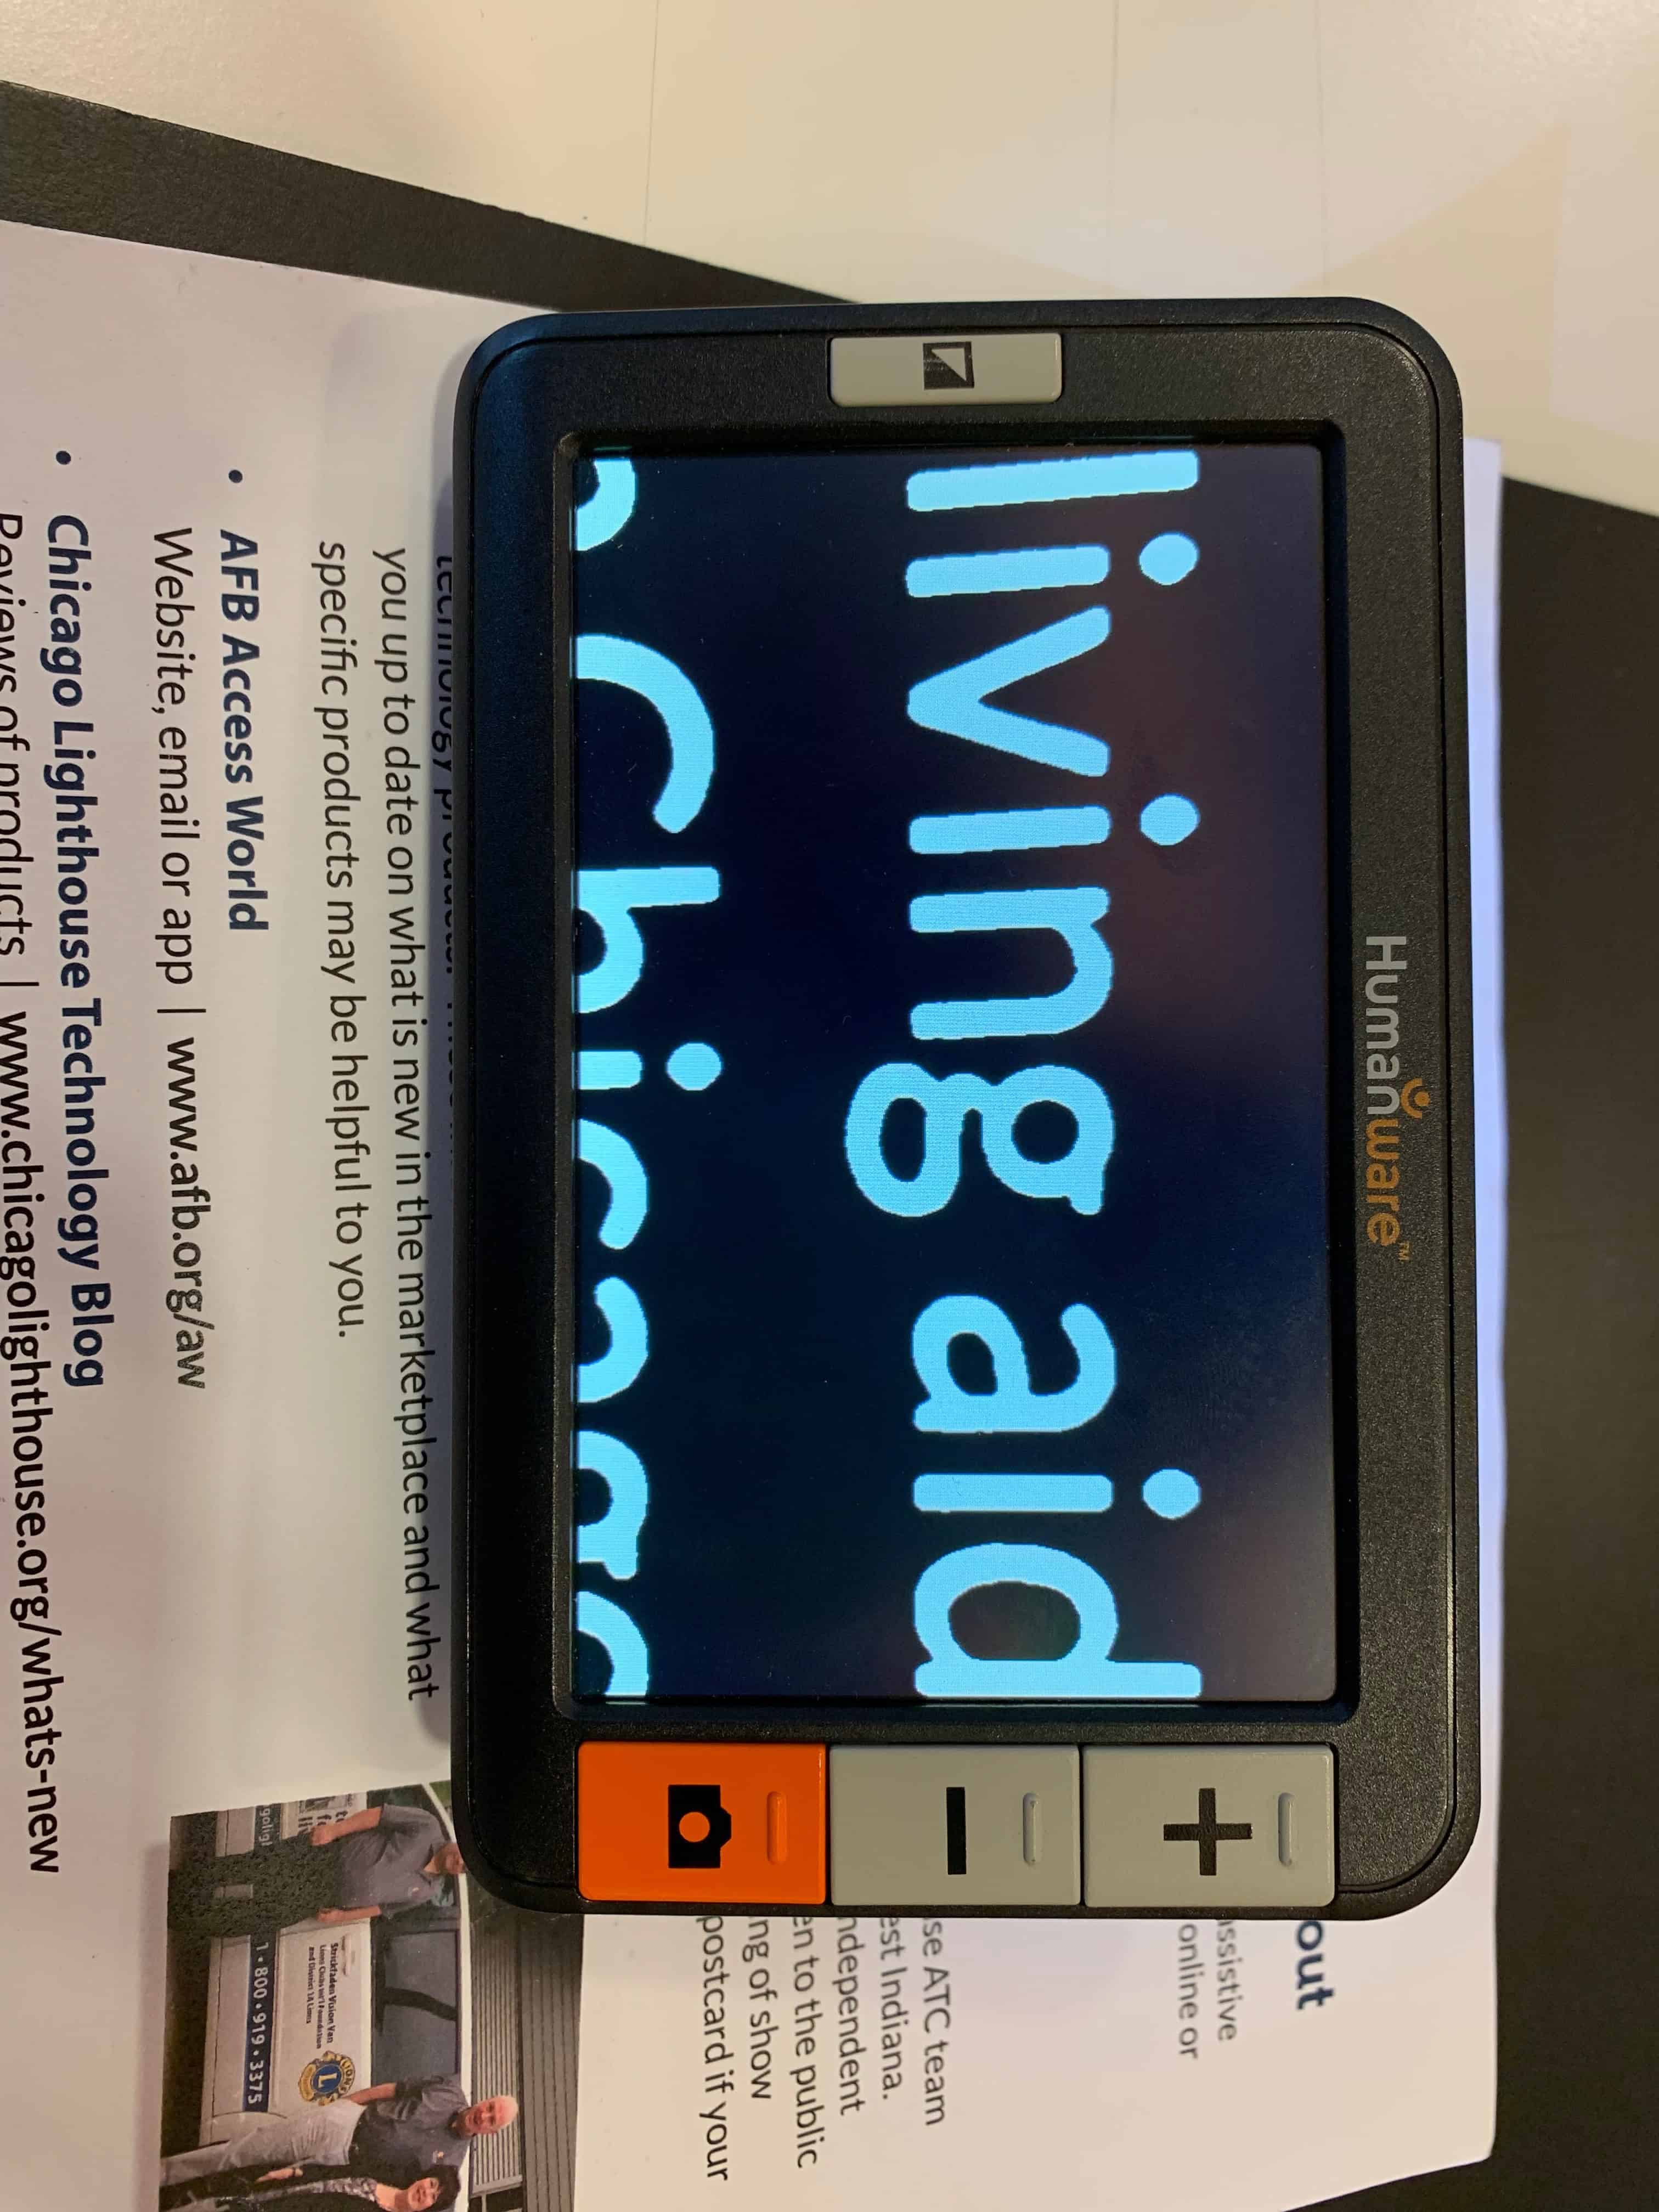 The Humanware Explore 5 device is shown magnifying text on a piece of paper.